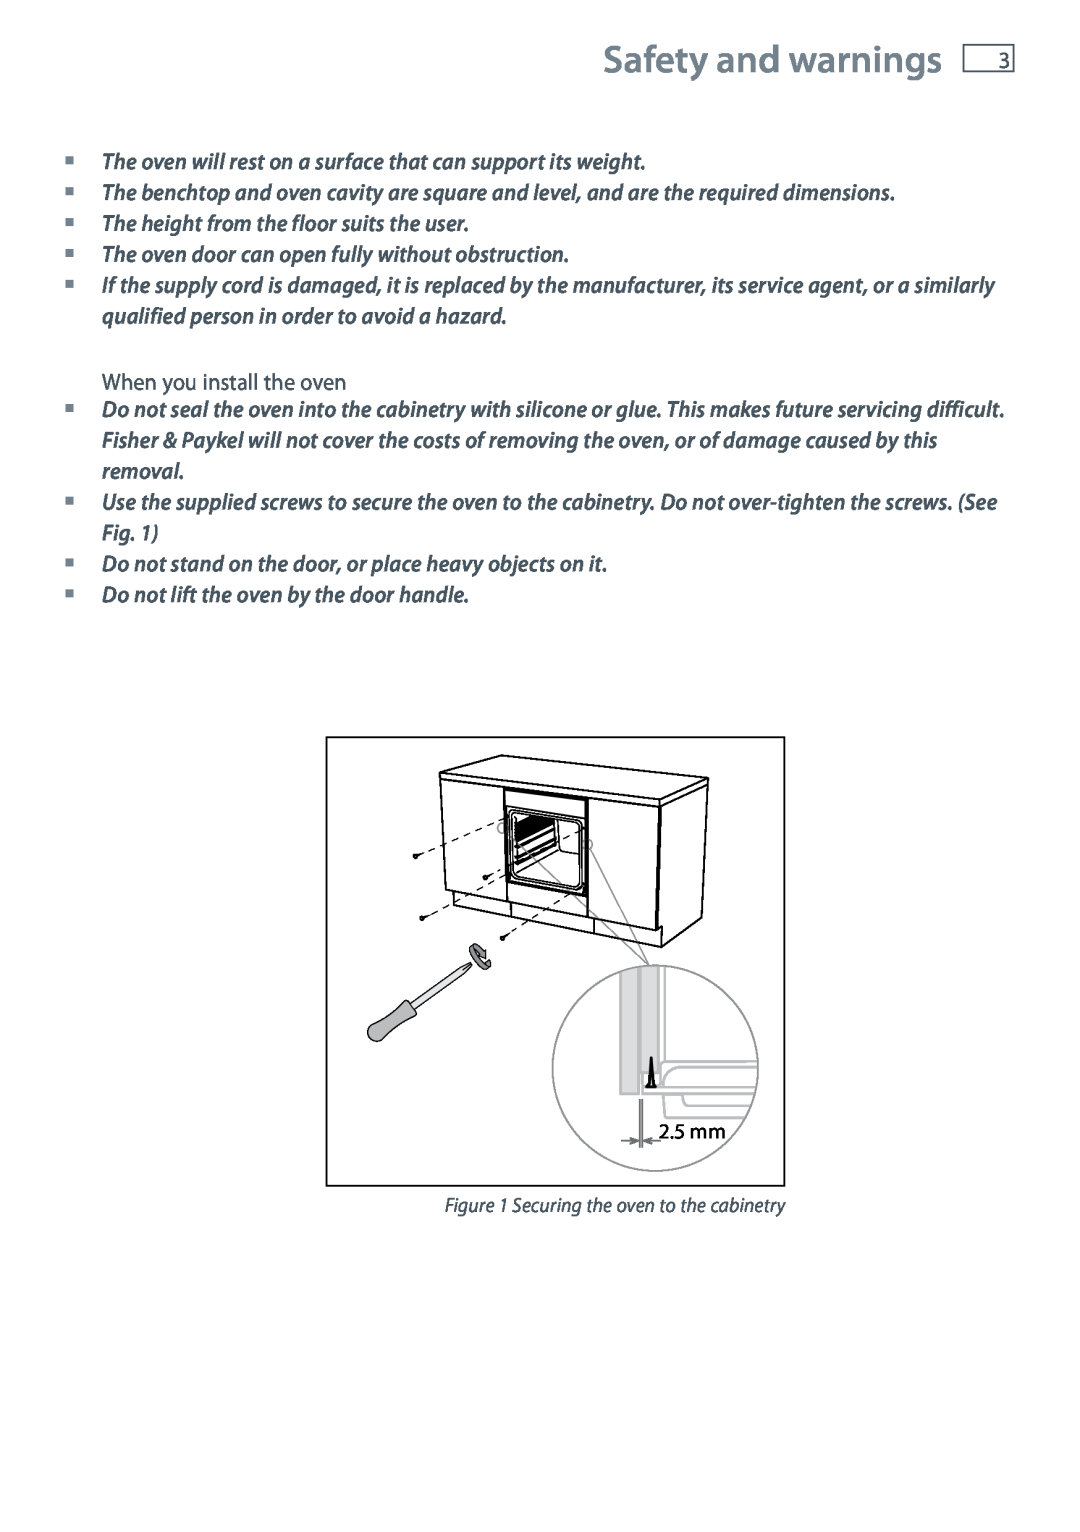 Fisher & Paykel OB60 Safety and warnings, The oven will rest on a surface that can support its weight 